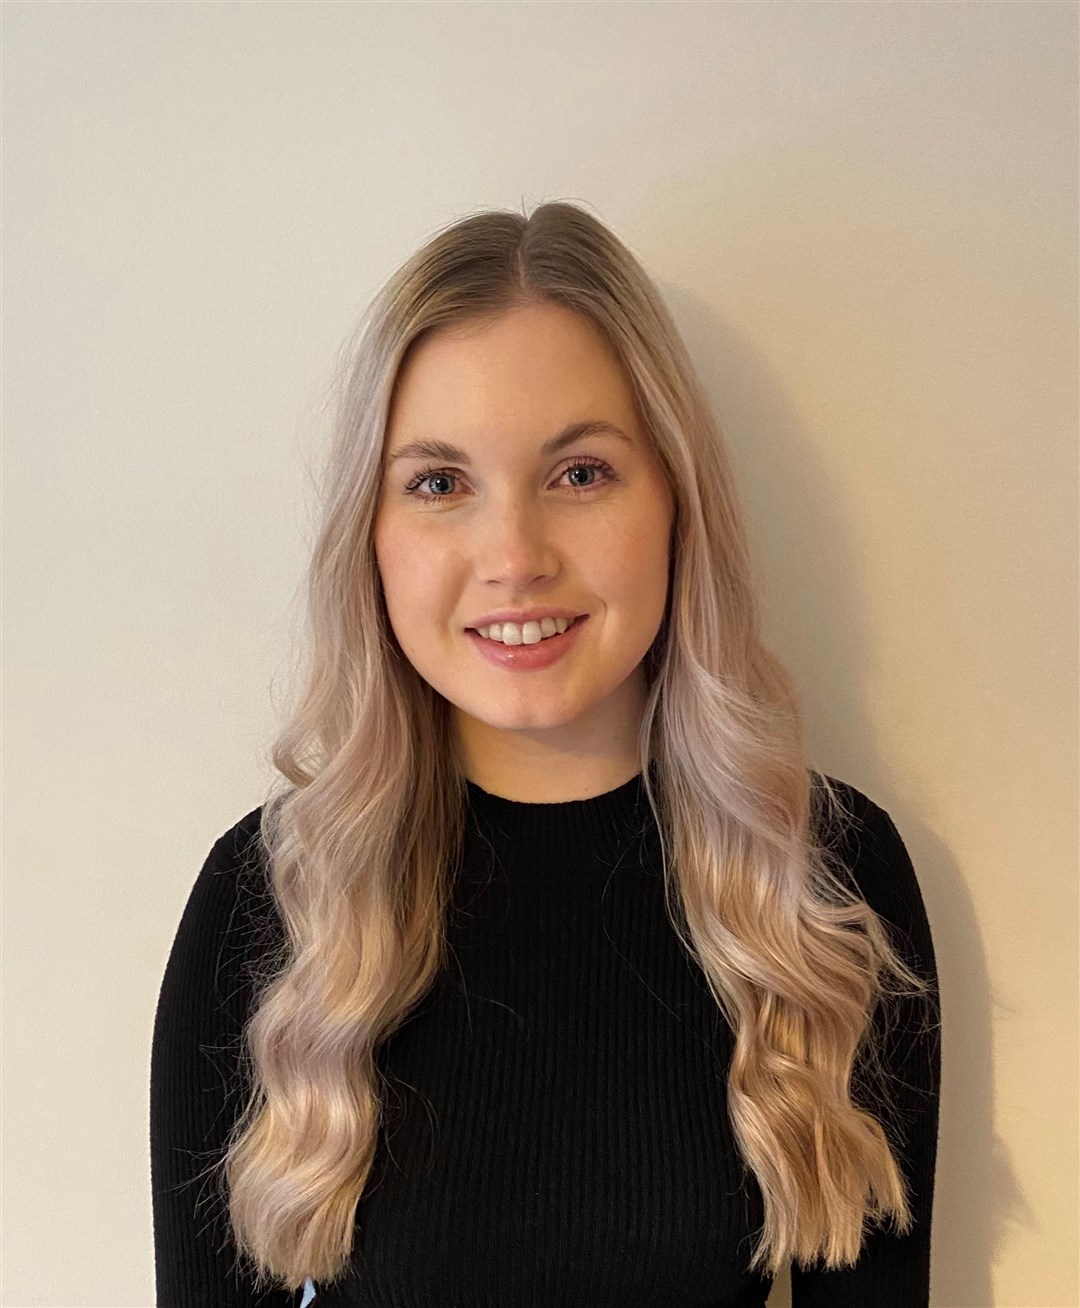 Kirsty Douglas, from Forres, started her career with Springfield Properties as a trainee.